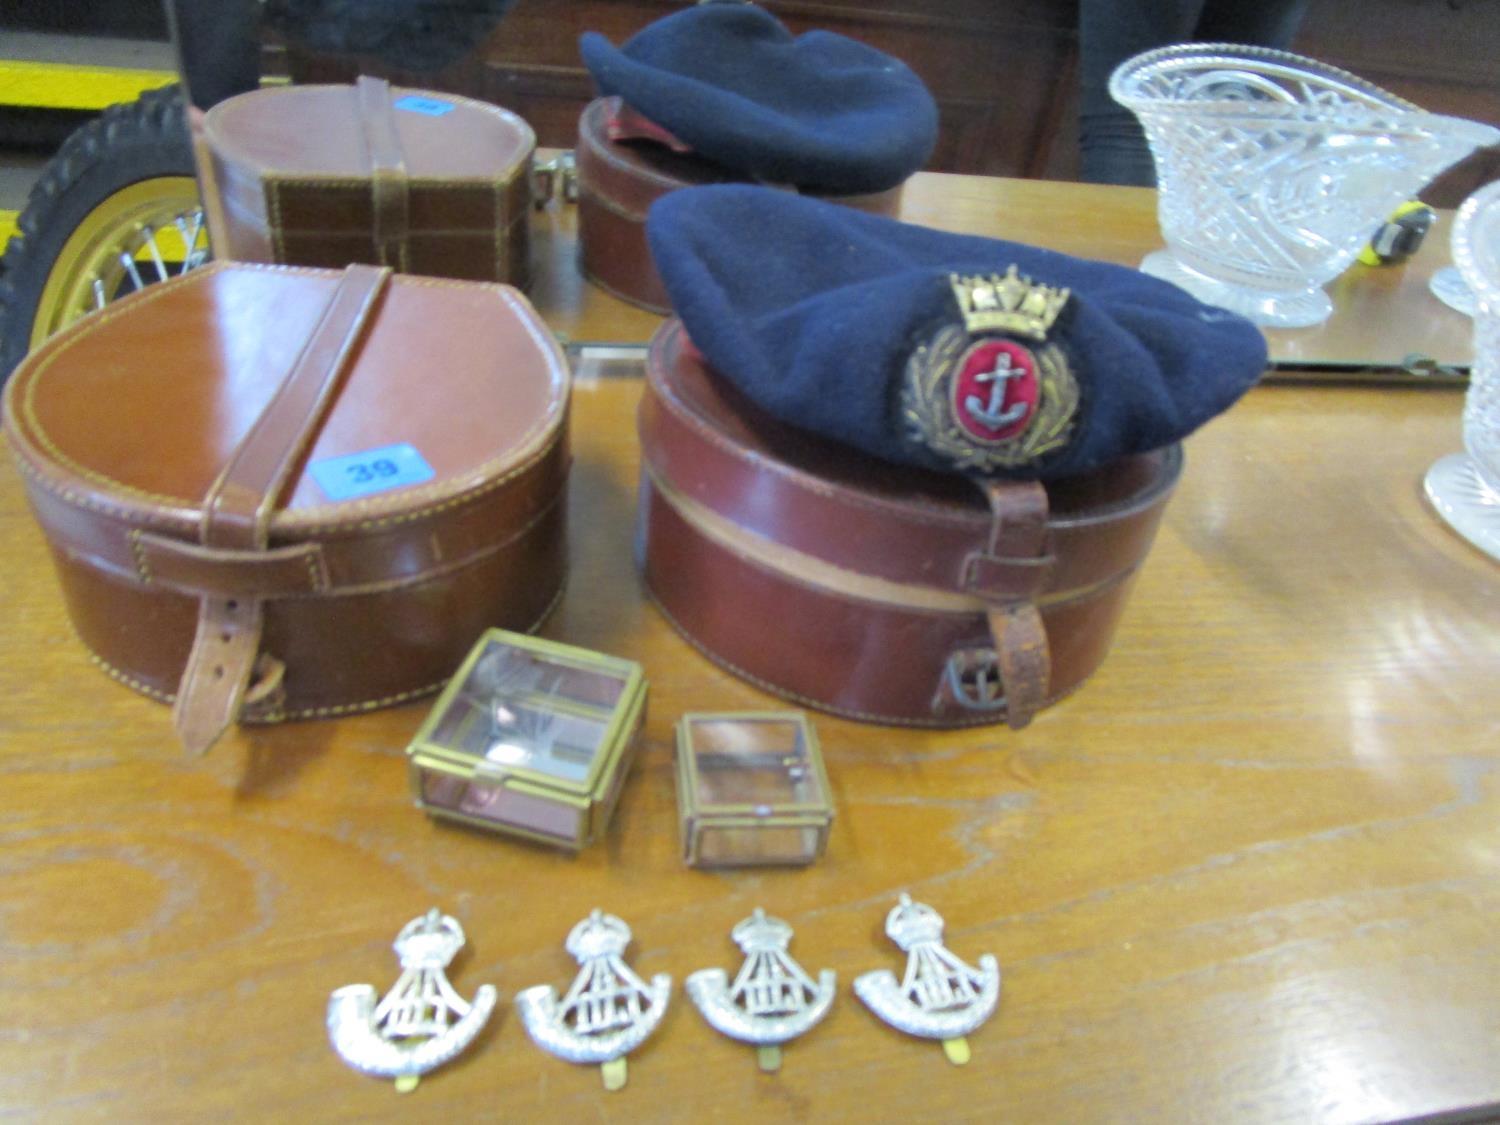 Durham Light Infantry cap badges, an early 20th century navy cap with a gold button badge and two